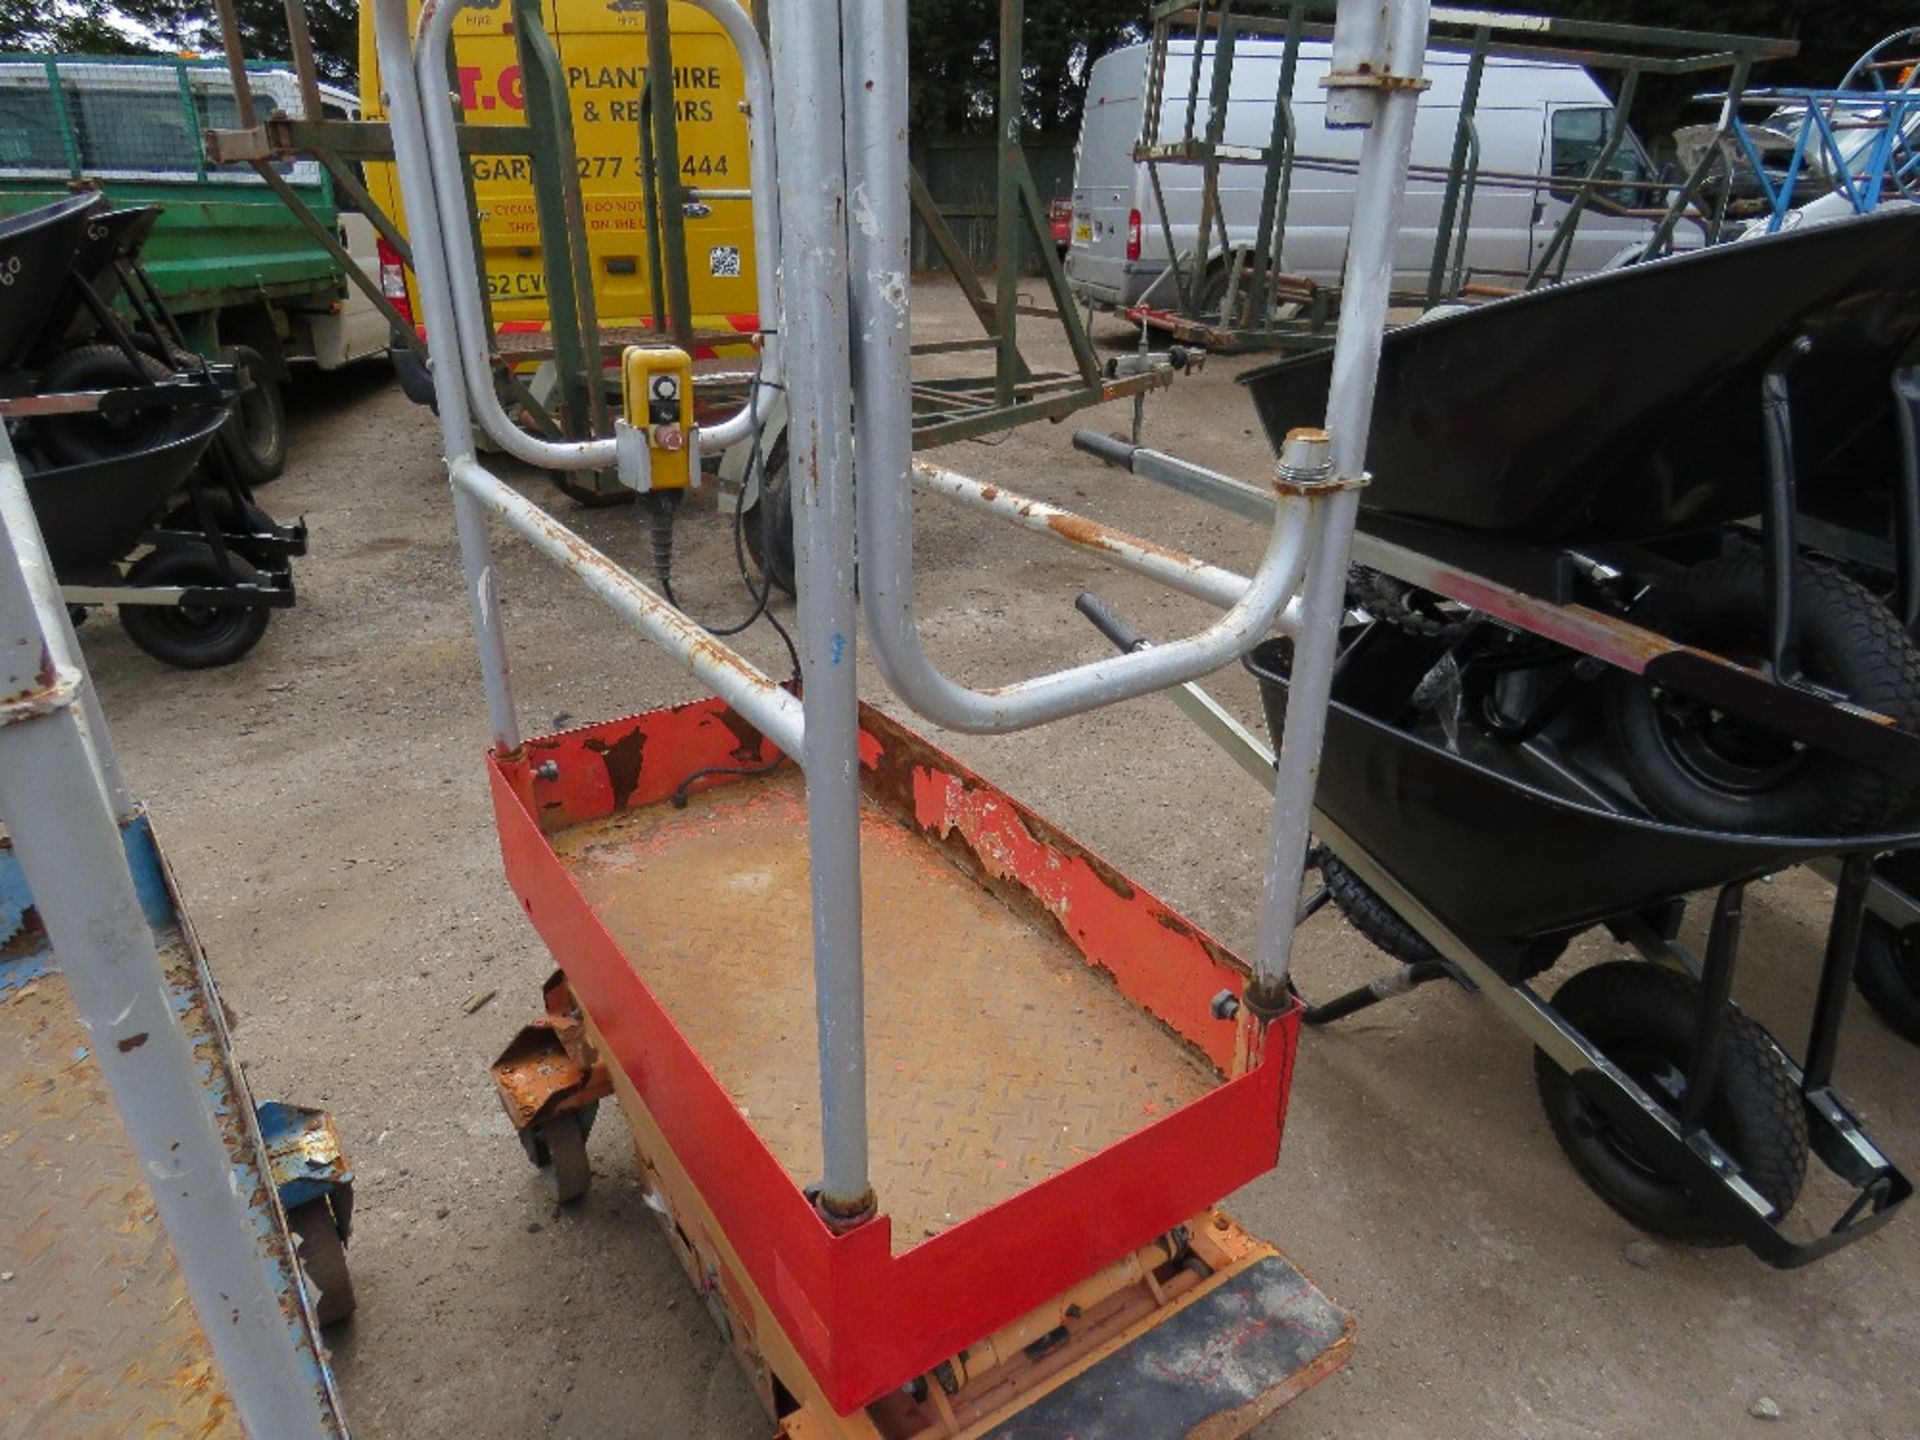 POPUP POWERED SCISSOR LIFT UNIT. WHEN TESTED WAS SEEN TO LIFT AND LOWER, BATTERY LOW